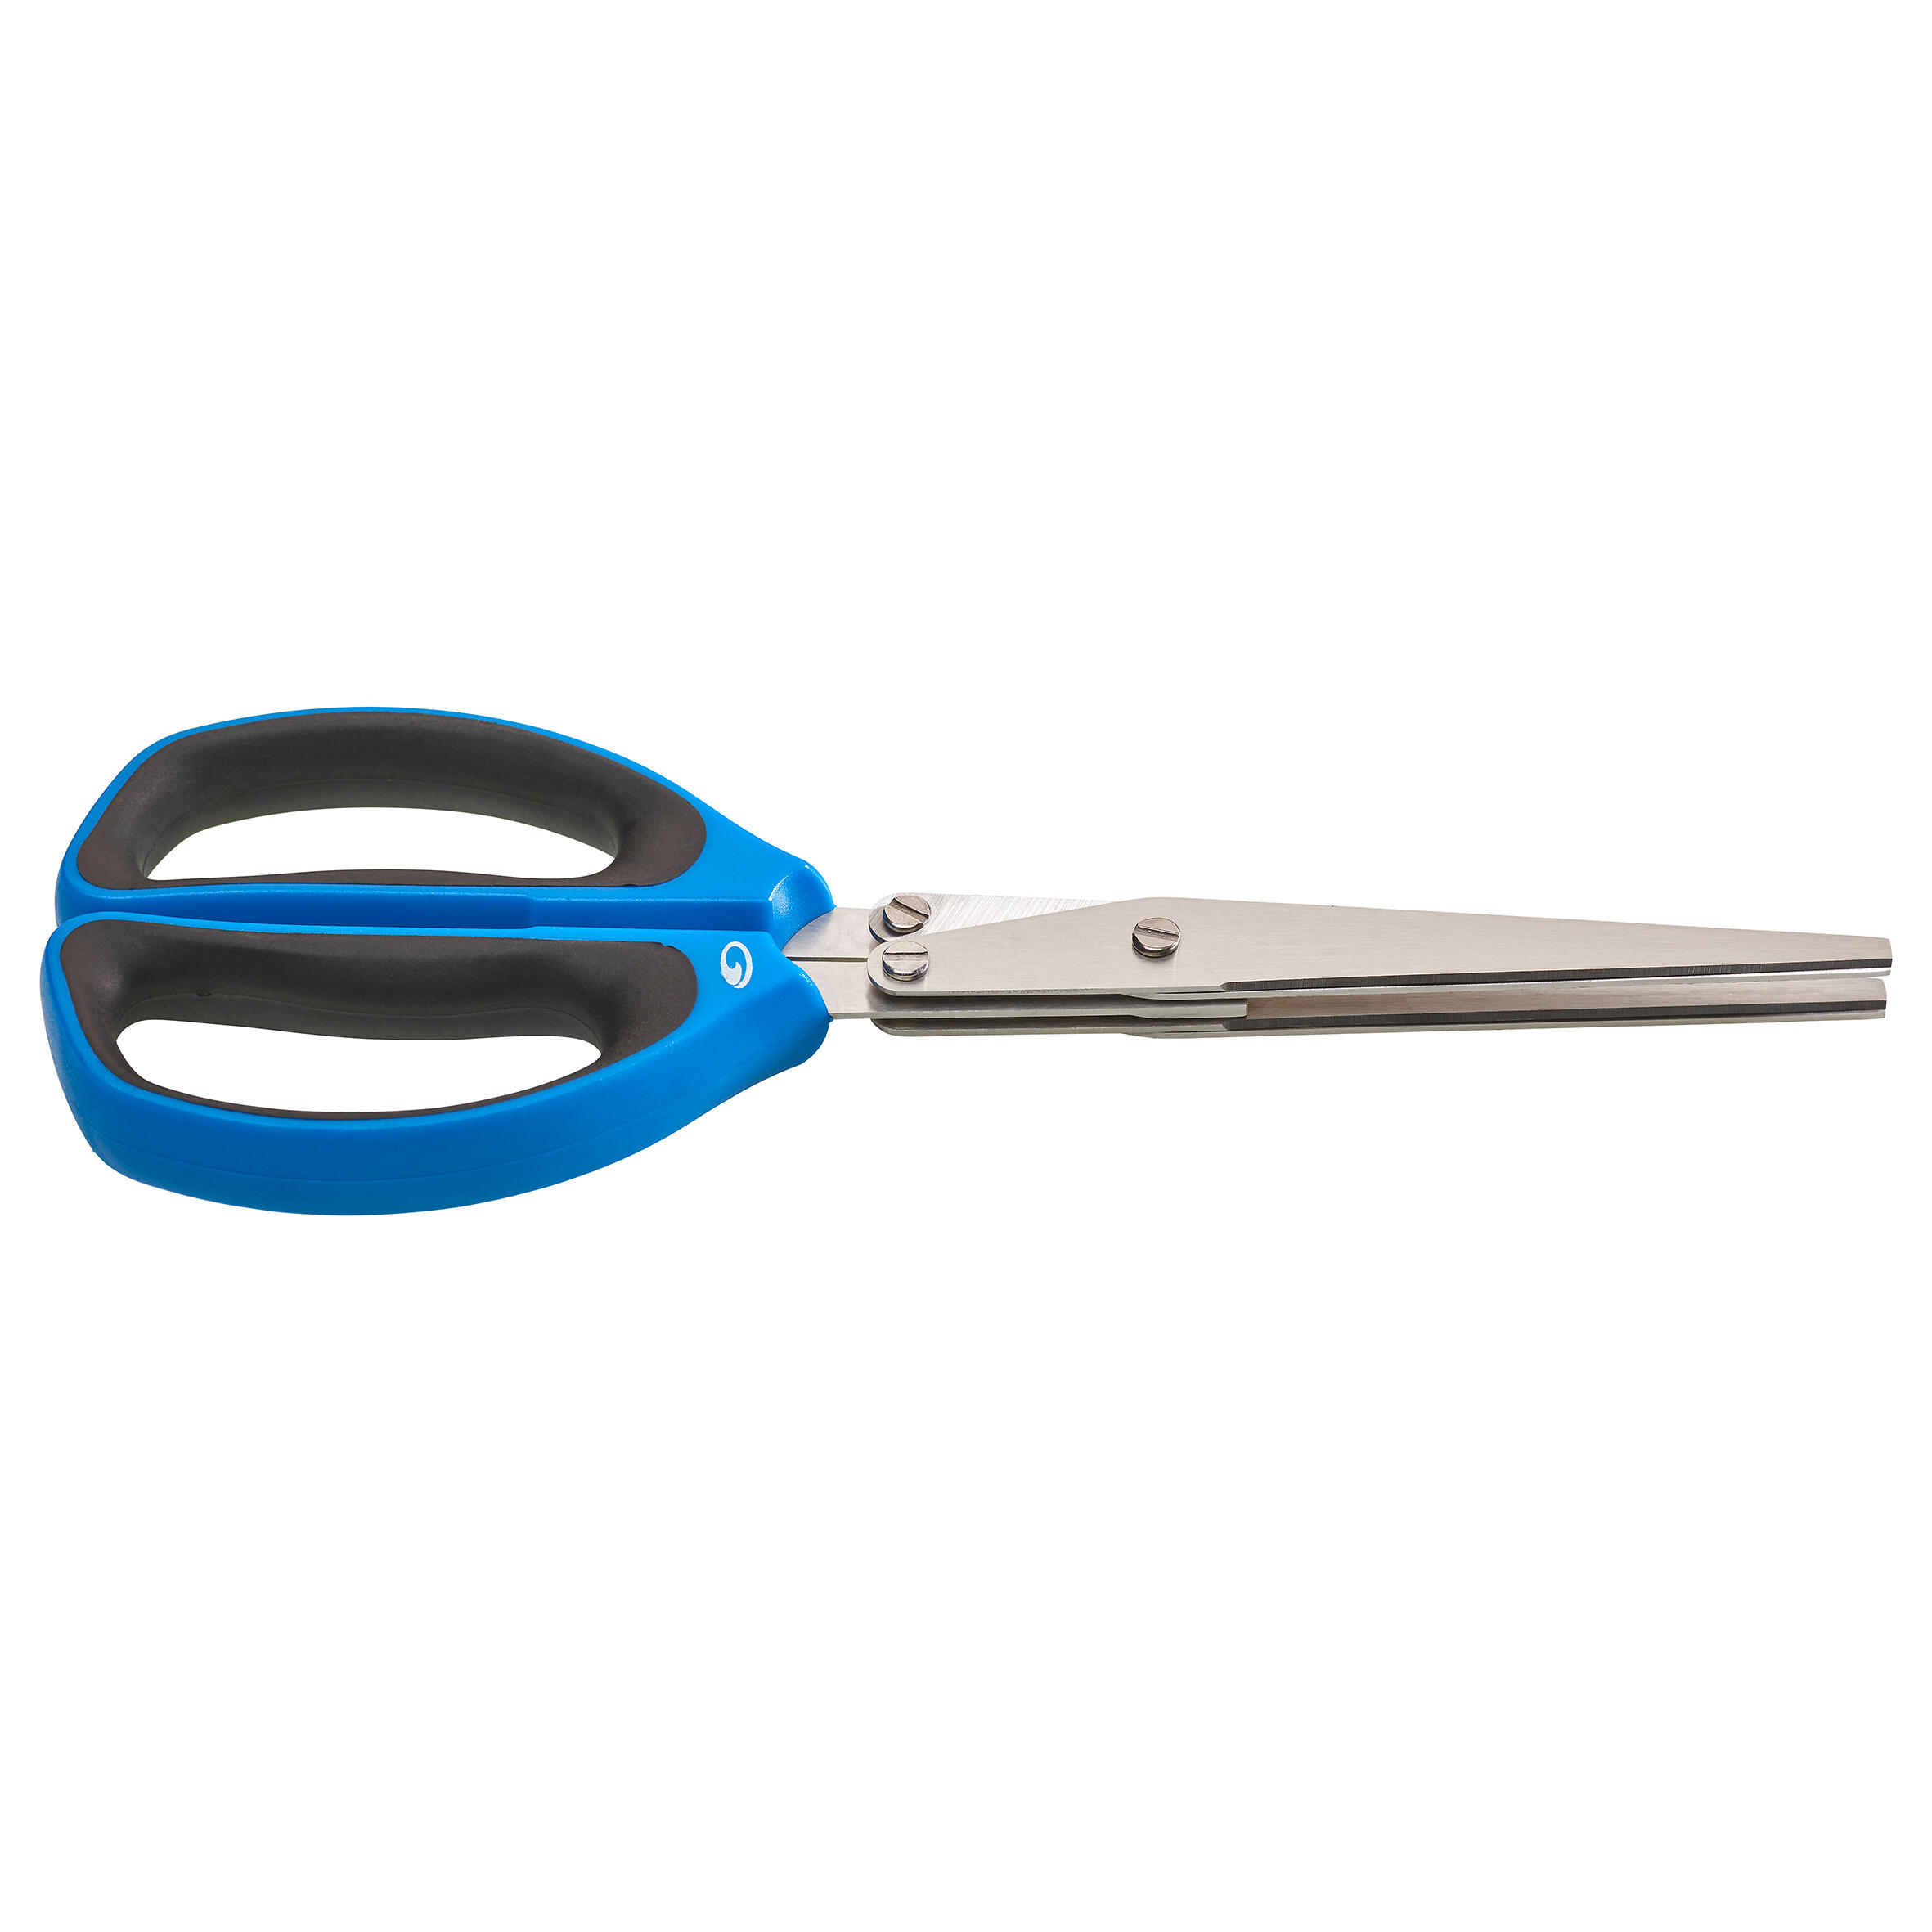 SCISSORS FOR CUTTING BAIT INTO SMALL PIECES 2/2